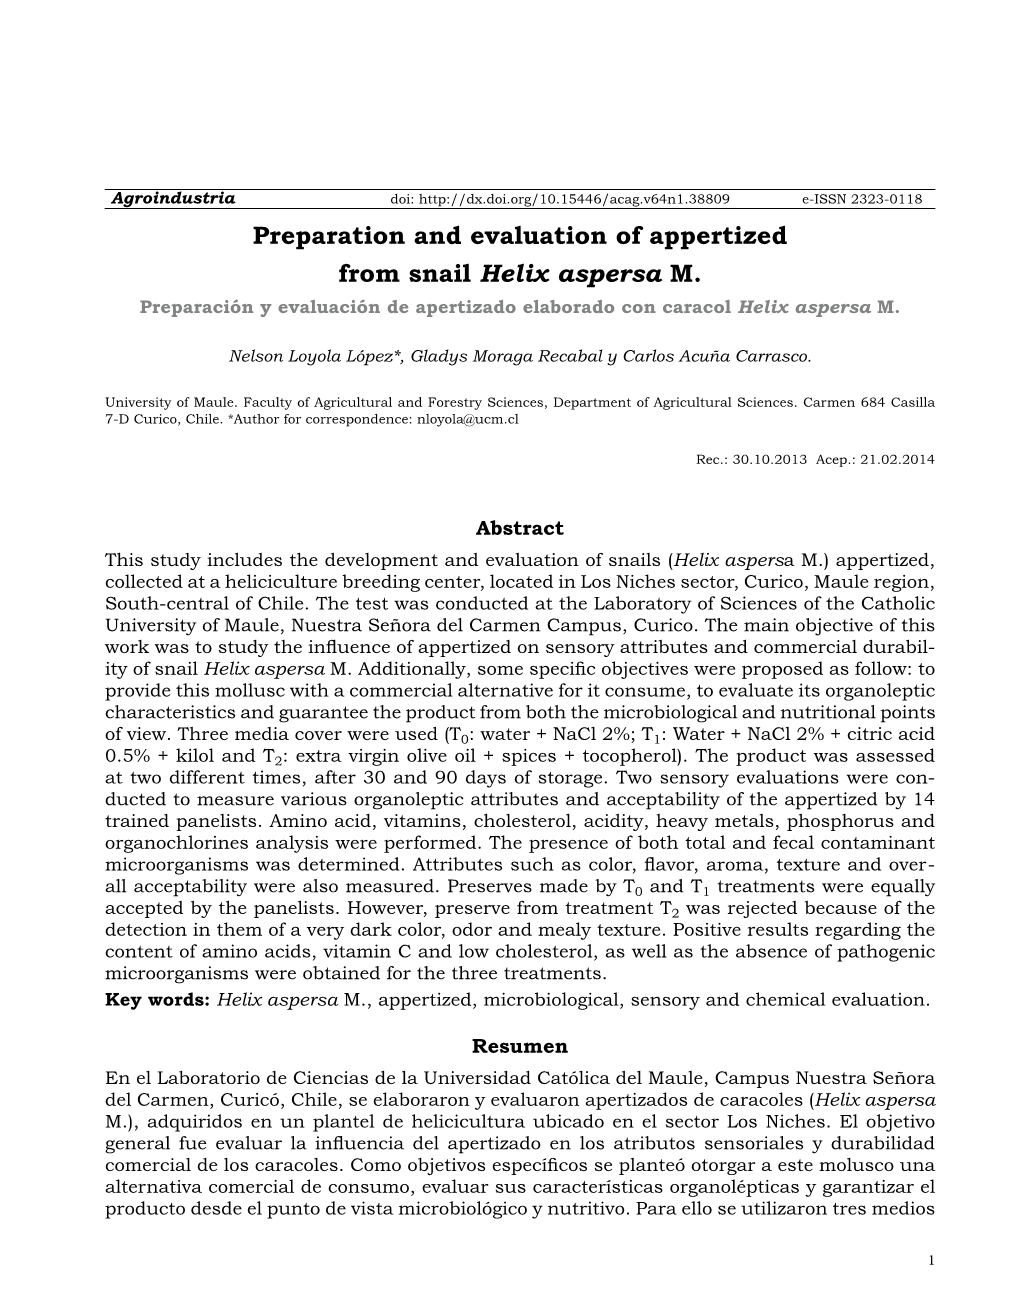 Preparation and Evaluation of Appertized from Snail Helix Aspersa M